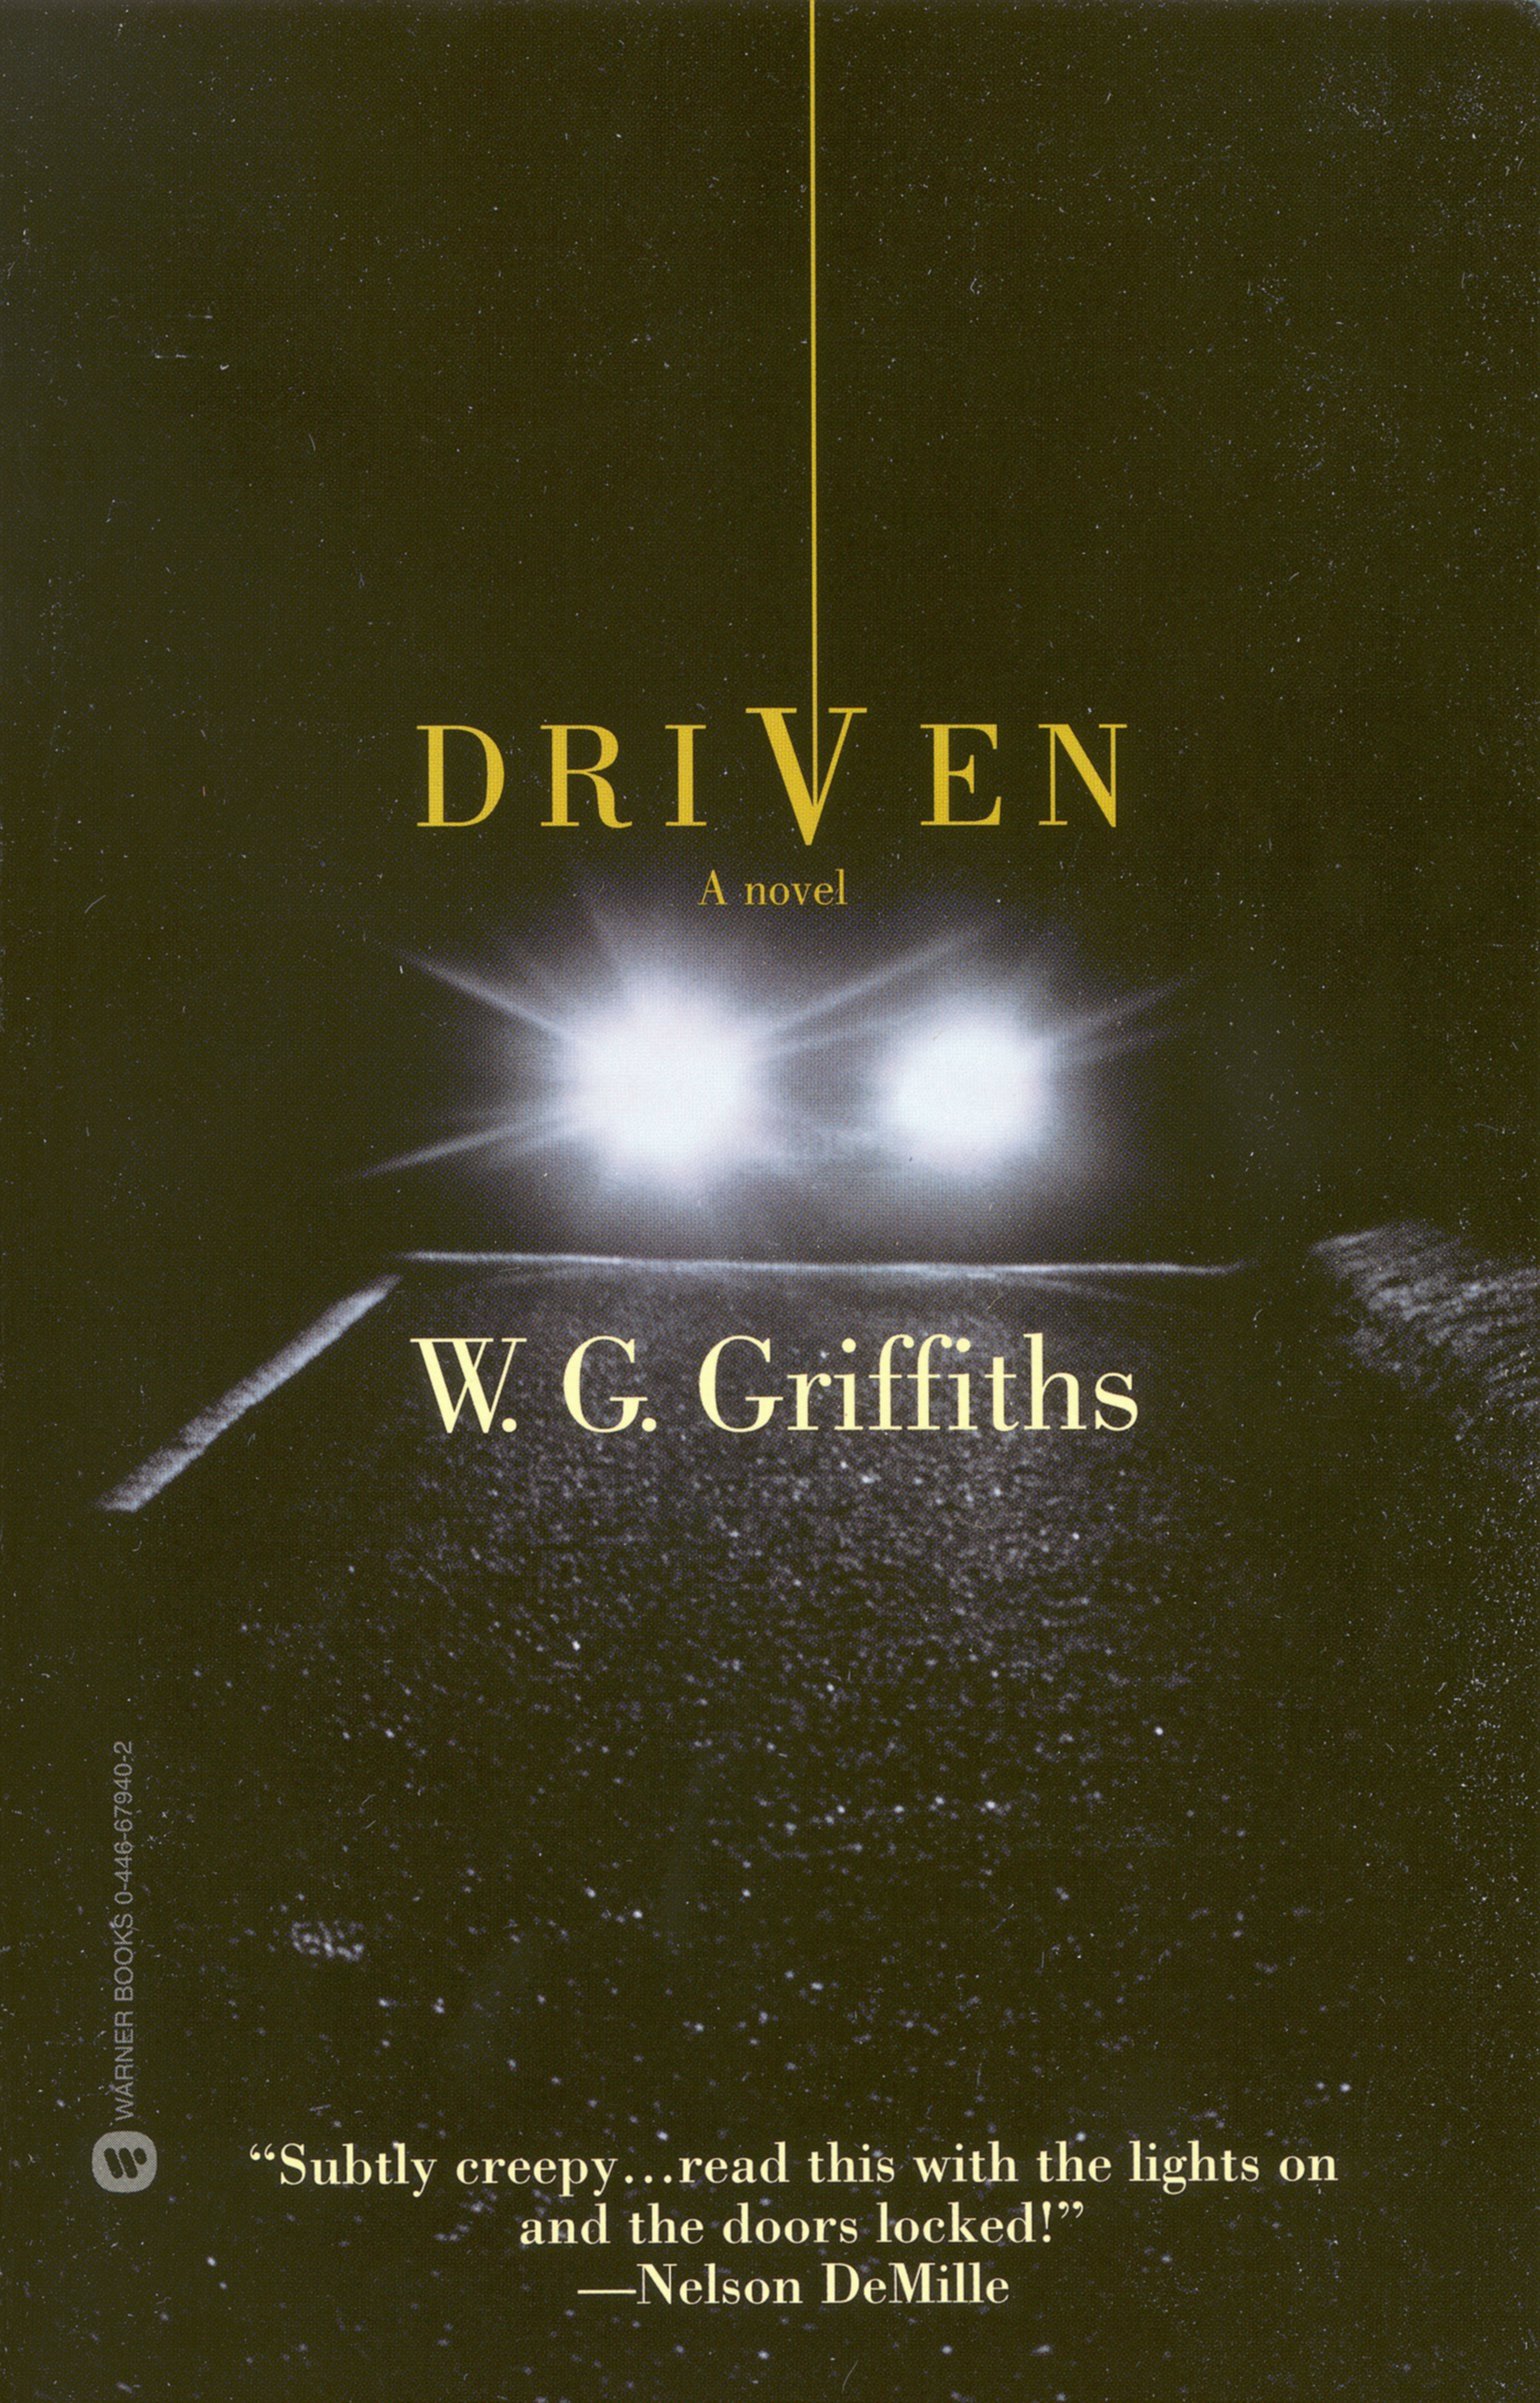 Driven by W. G. Griffiths